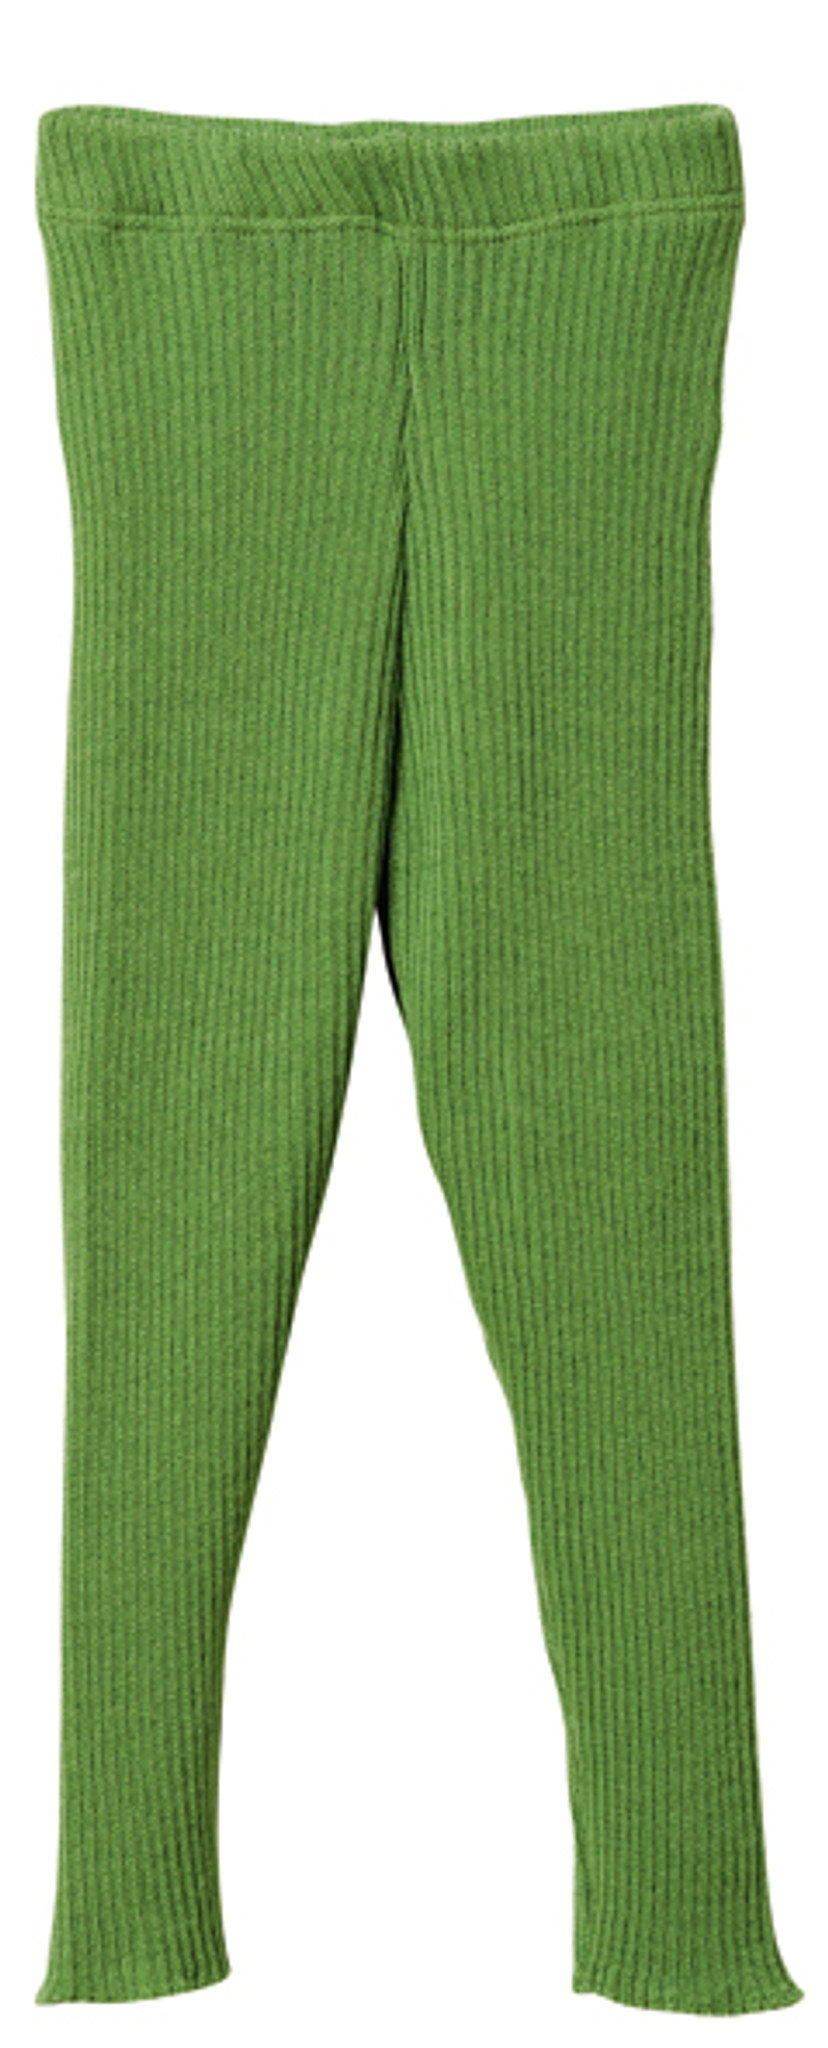 Tights from Merino wool with silk - GREEN ROSE